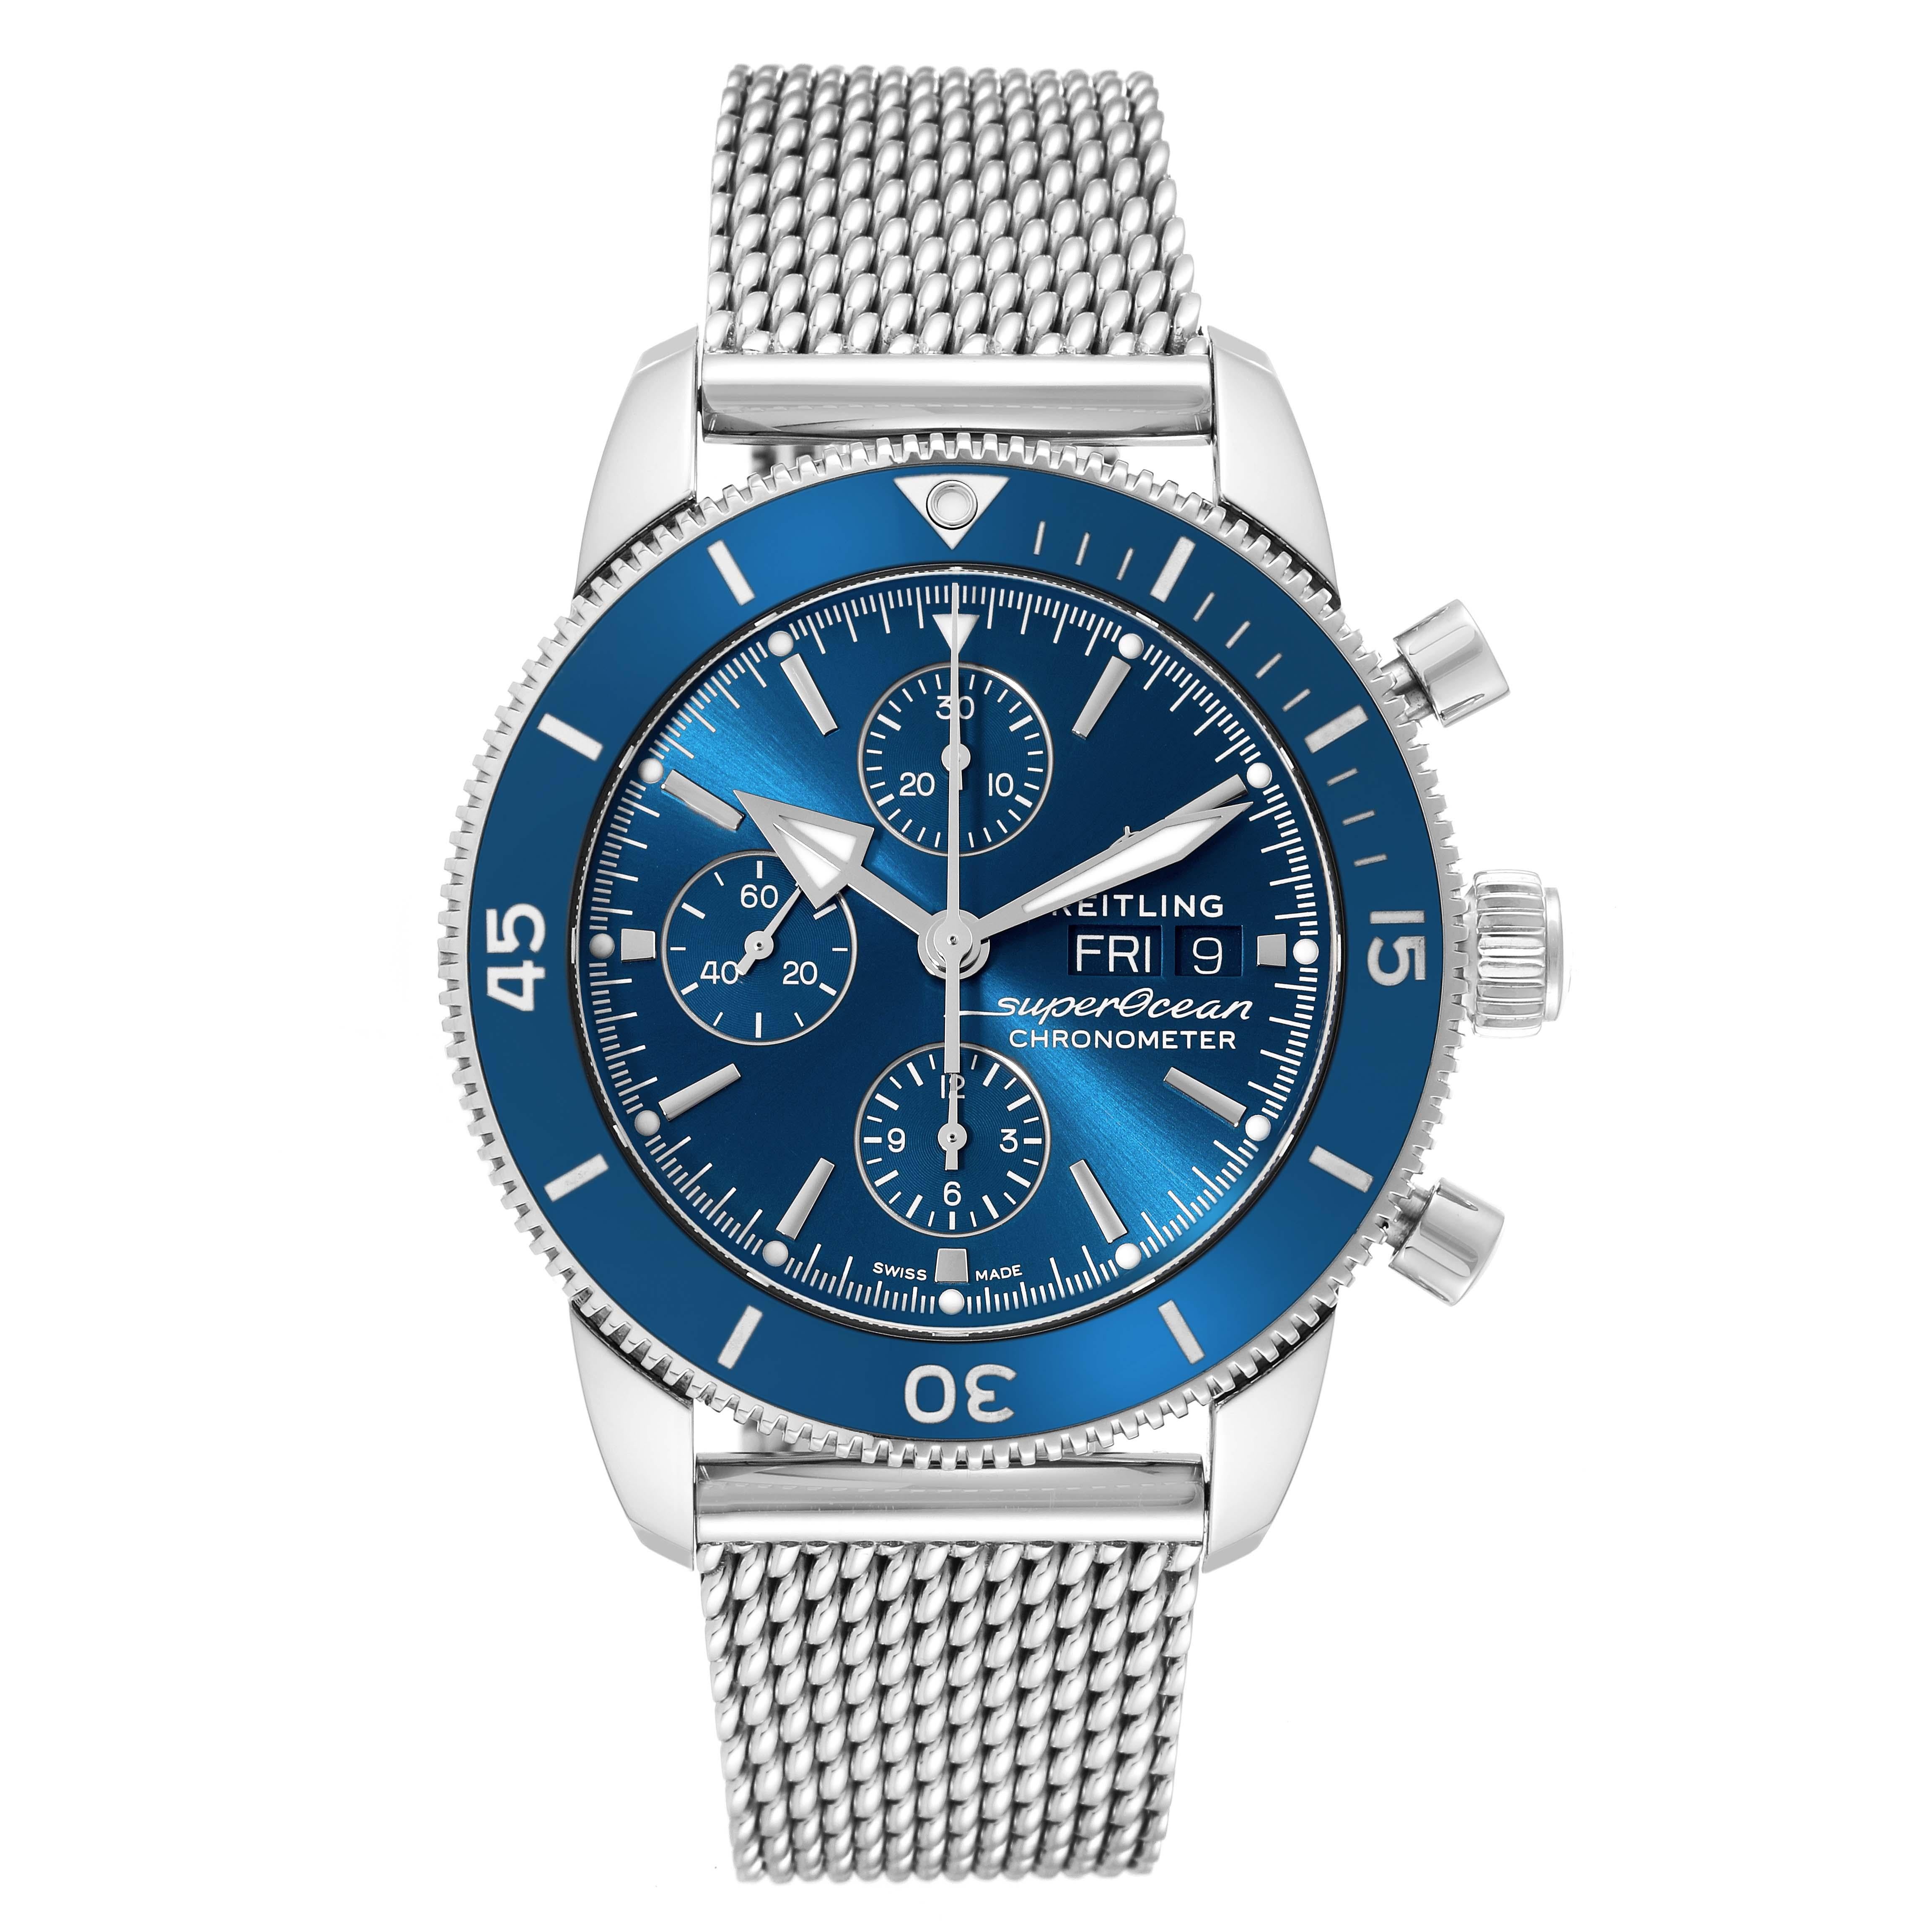 Breitling SuperOcean Heritage II Chrono Blue Dial Mens Watch A13313 Box Card. Automatic self-winding movement. Stainless steel case 44.0 mm in diameter. Stainless steel screwed-down crown. Blue unidirectional rotating bezel. Scratch resistant